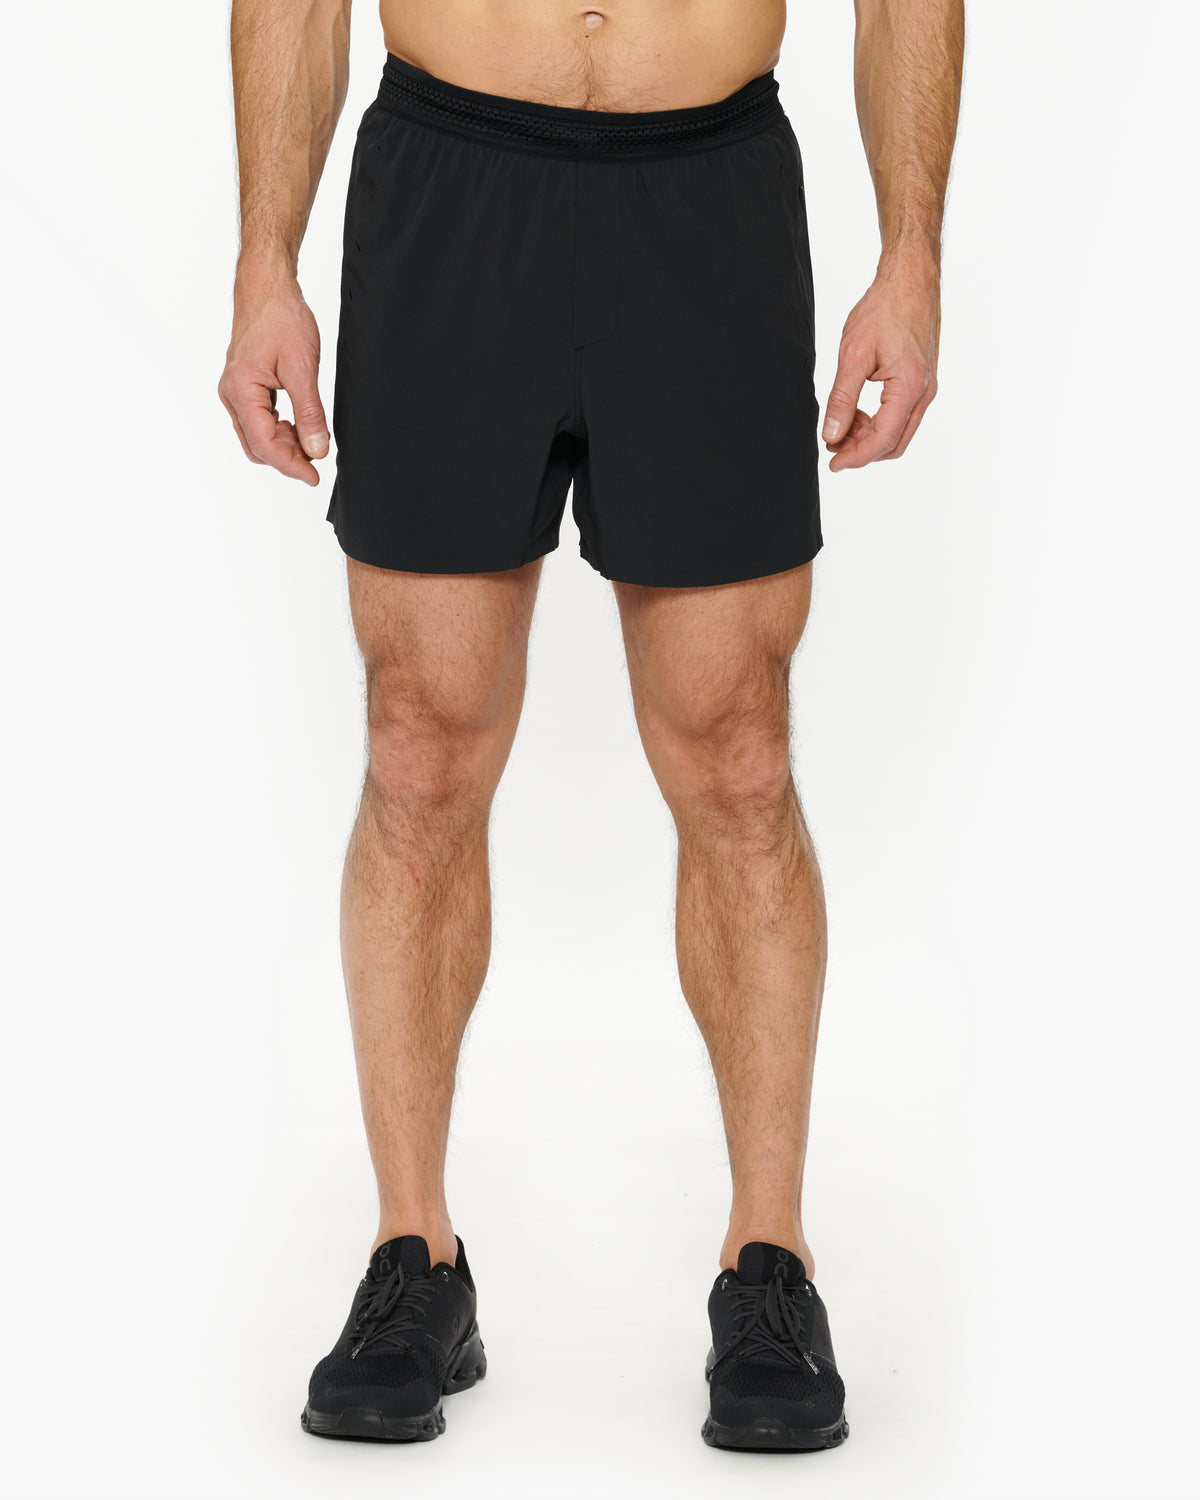 Ten Thousand Session Short 5 - Unlined – The Shop at Equinox